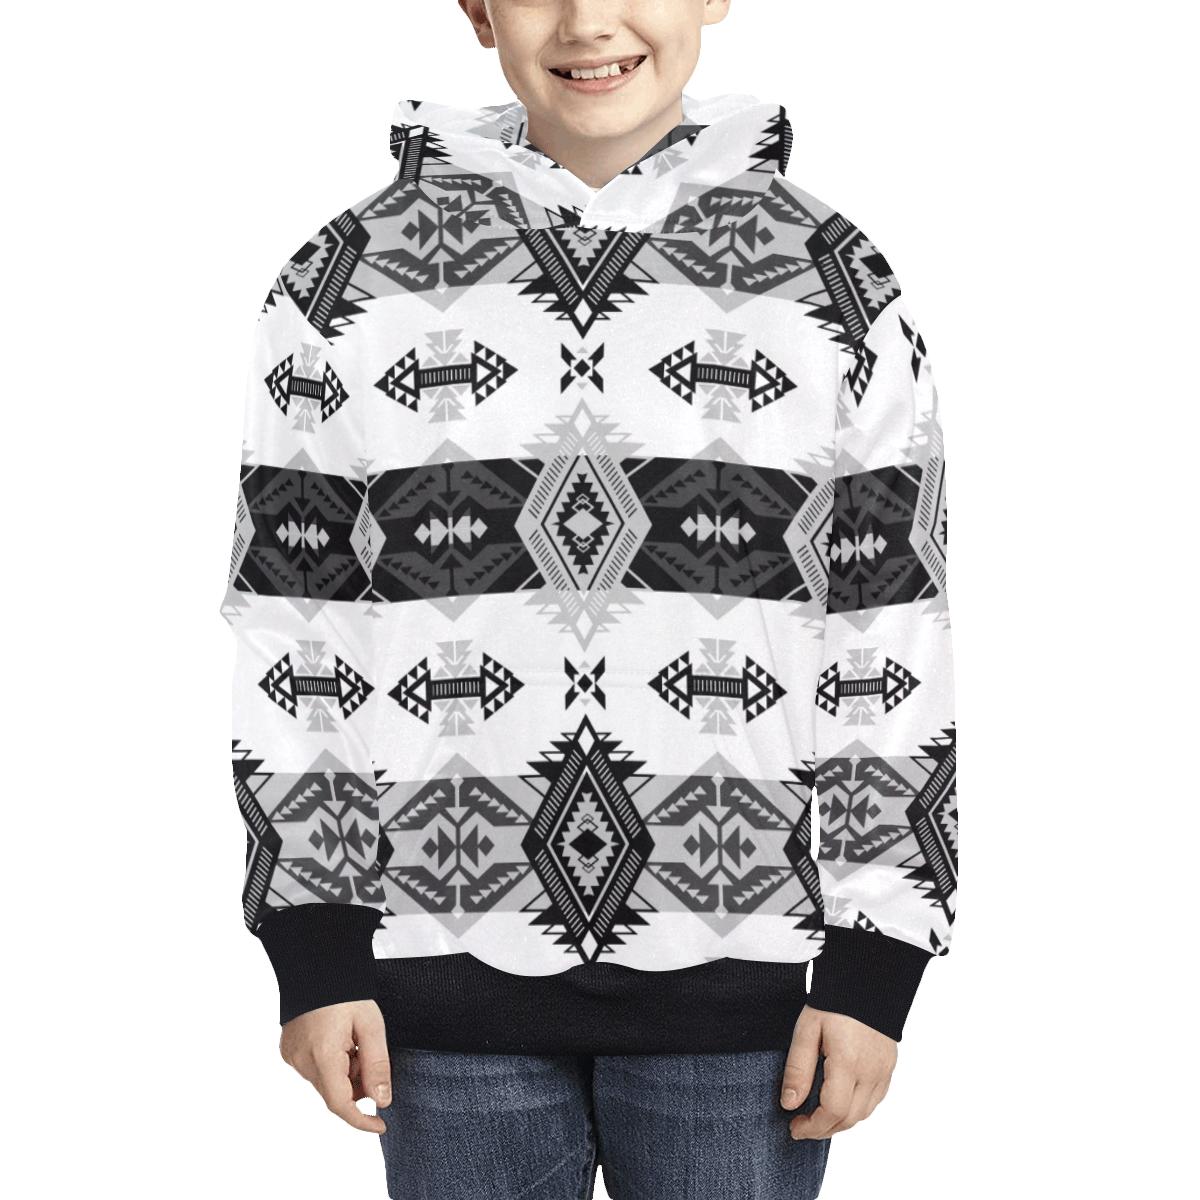 Sovereign Nation Black and White Kids' All Over Print Hoodie (Model H38) Kids' AOP Hoodie (H38) e-joyer 